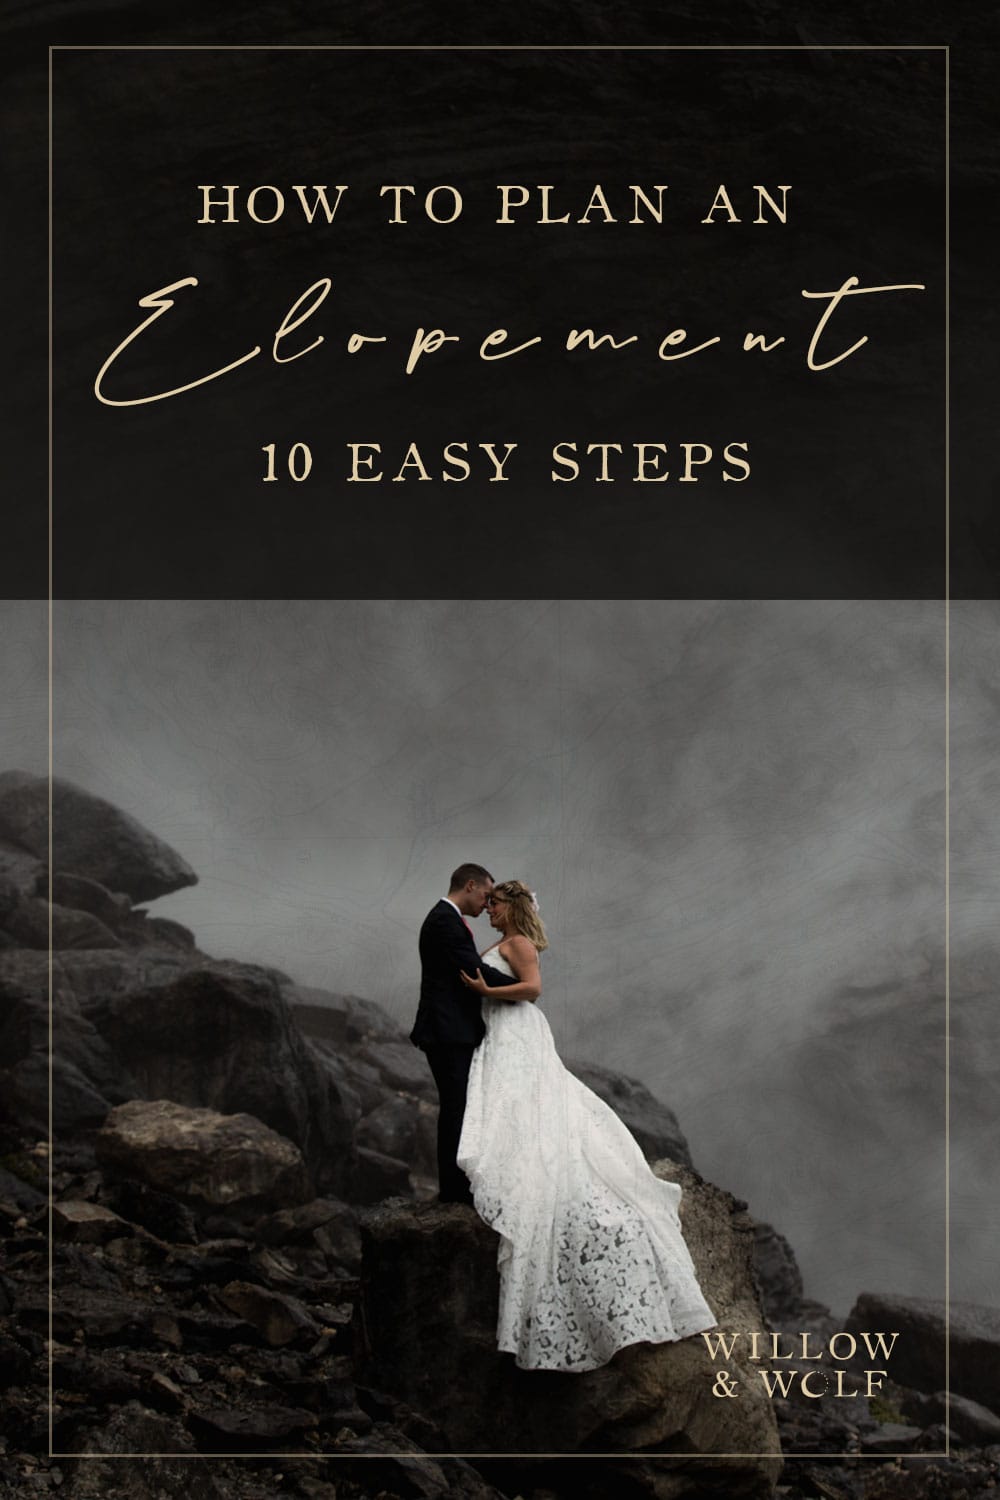 how to plan an elopement in 10 easy steps